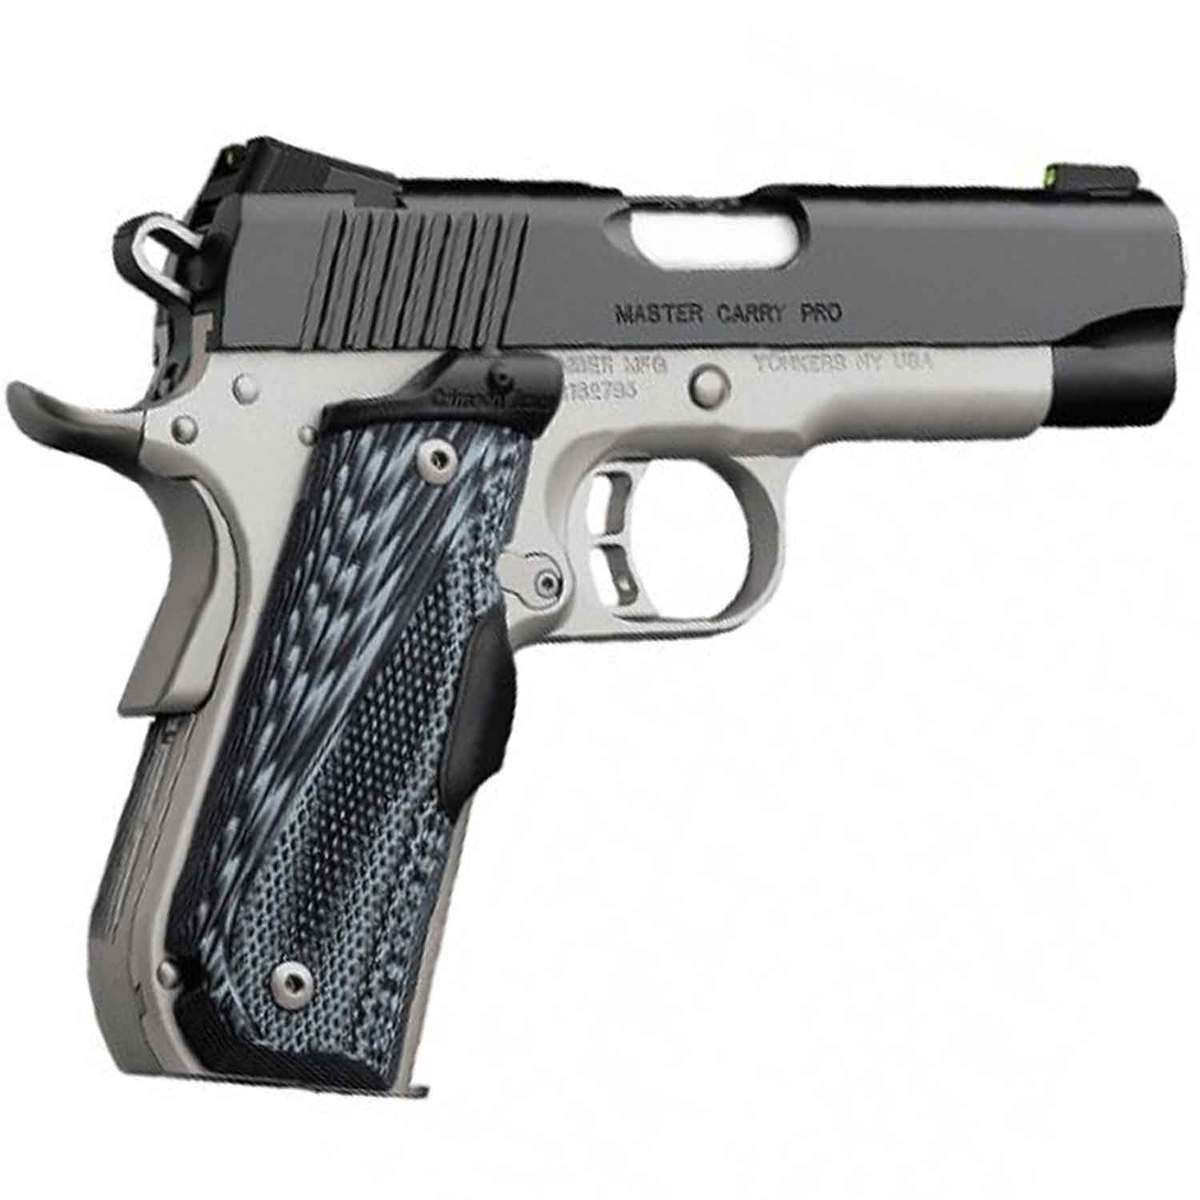 Kimber Master Carry 45 Auto Acp 3in Matte Black And Satin Silverblued Pistol 71 Rounds 8581